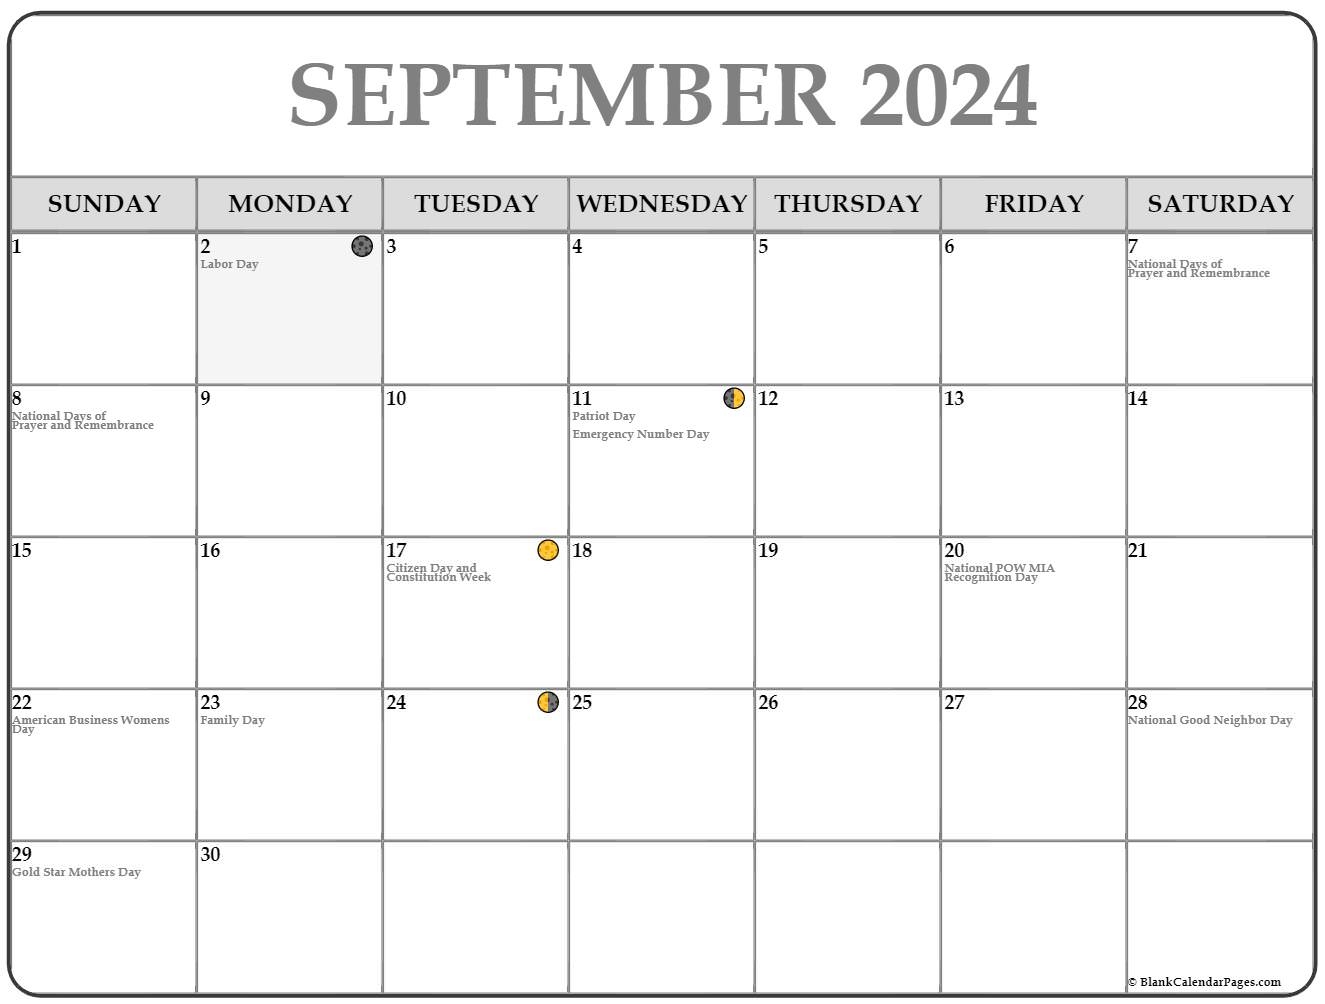 September 2024 Moon Calendar Shawn Dolorita - Free Printable 2024 Monthly Calendar With Holidays Moon Phases